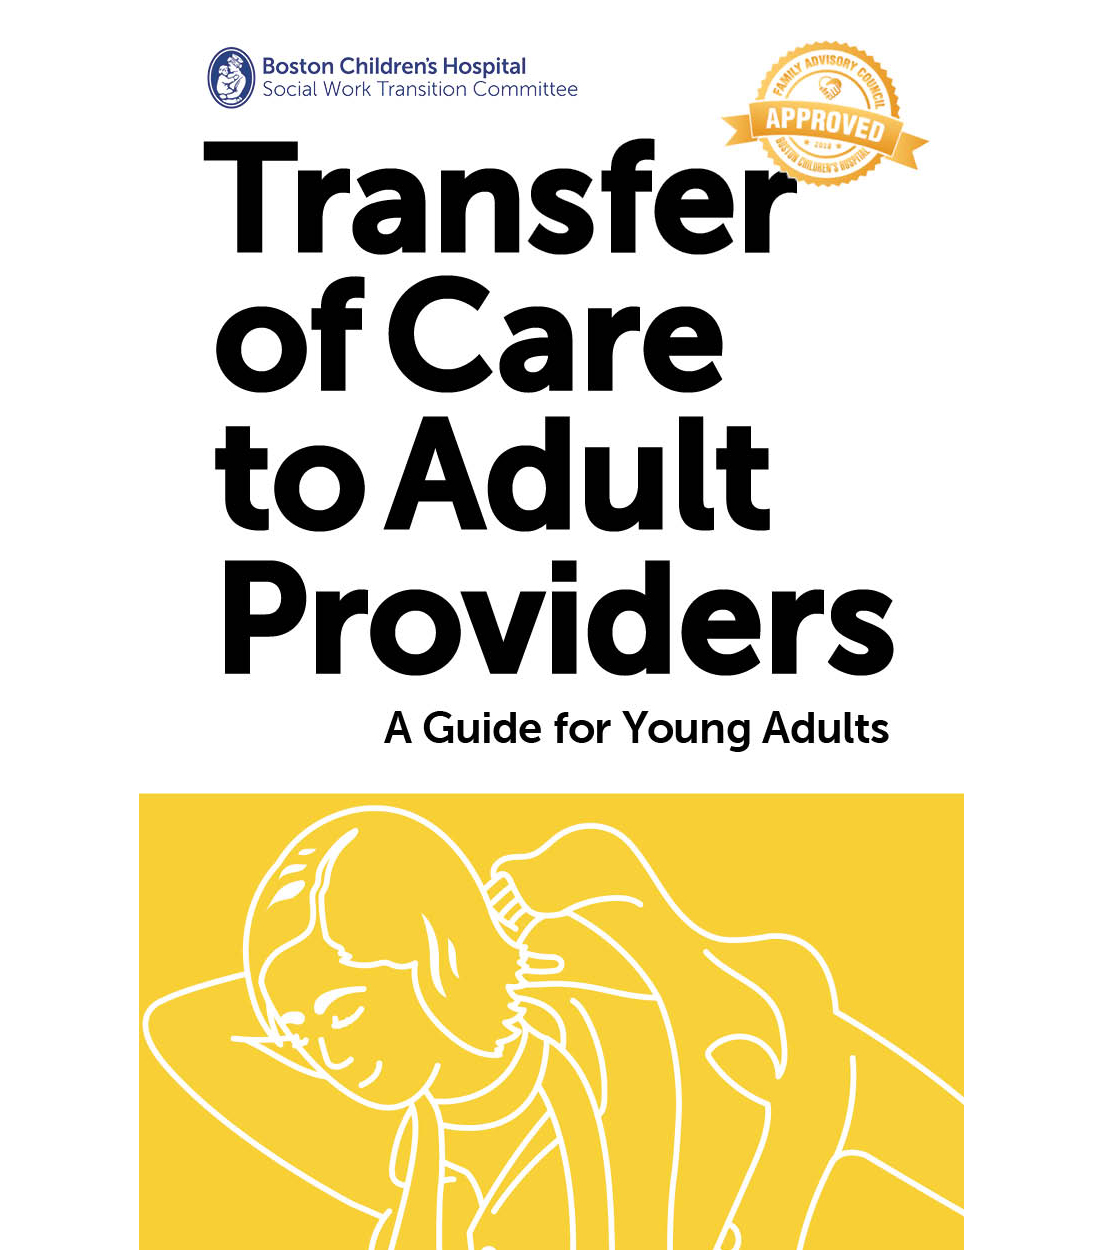 Transfer of Care guide for Young Adults